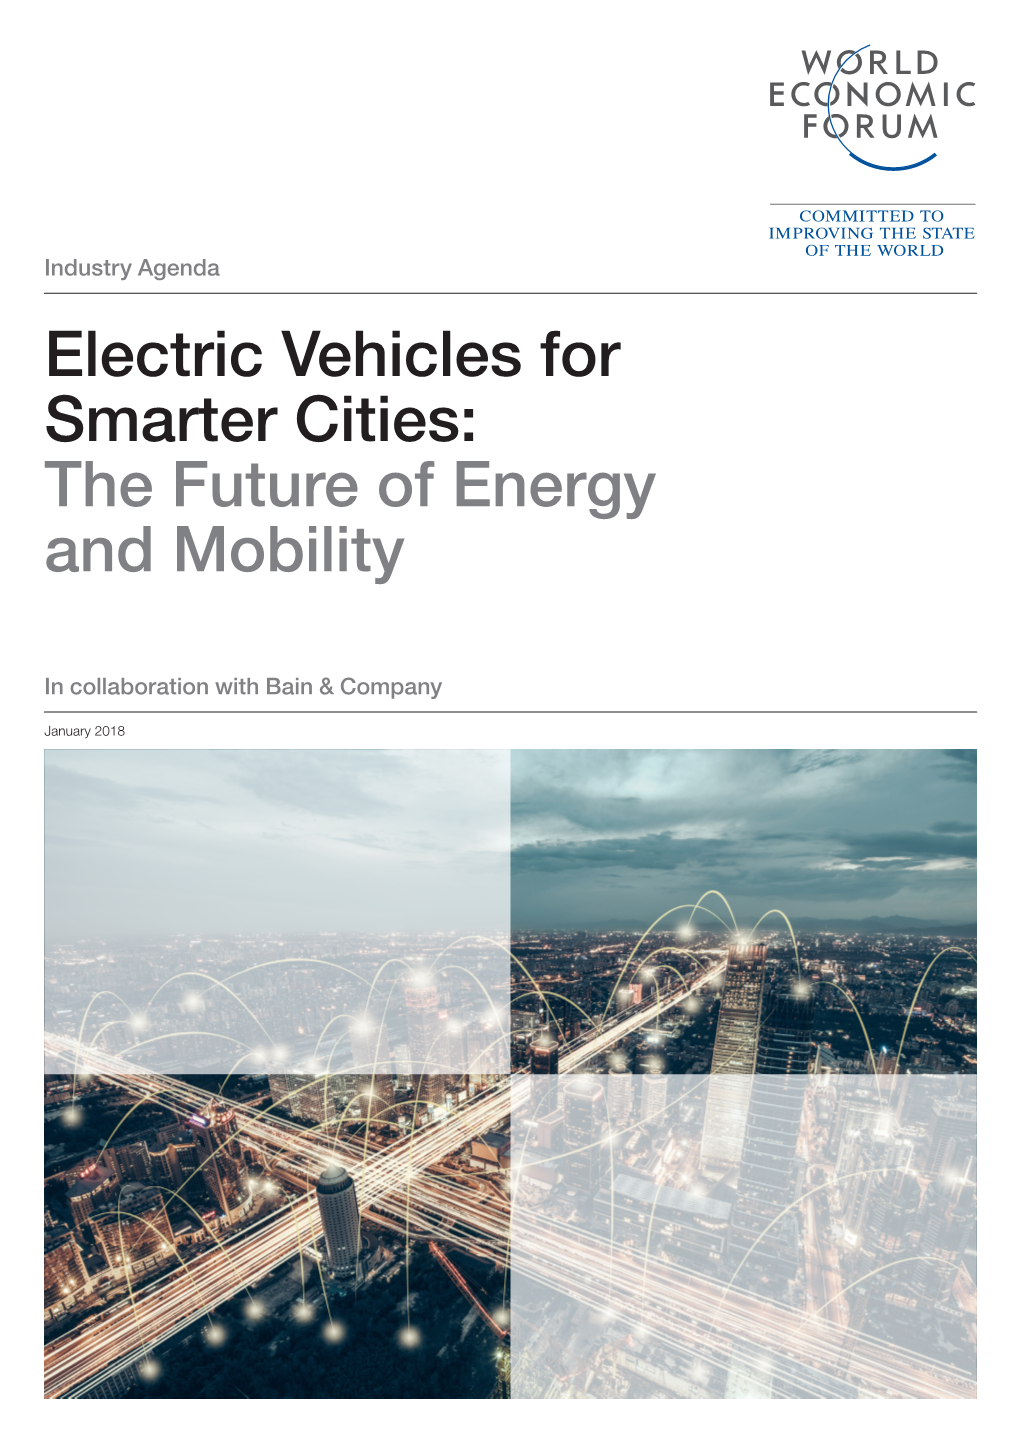 Electric Vehicles for Smarter Cities: the Future of Energy and Mobility